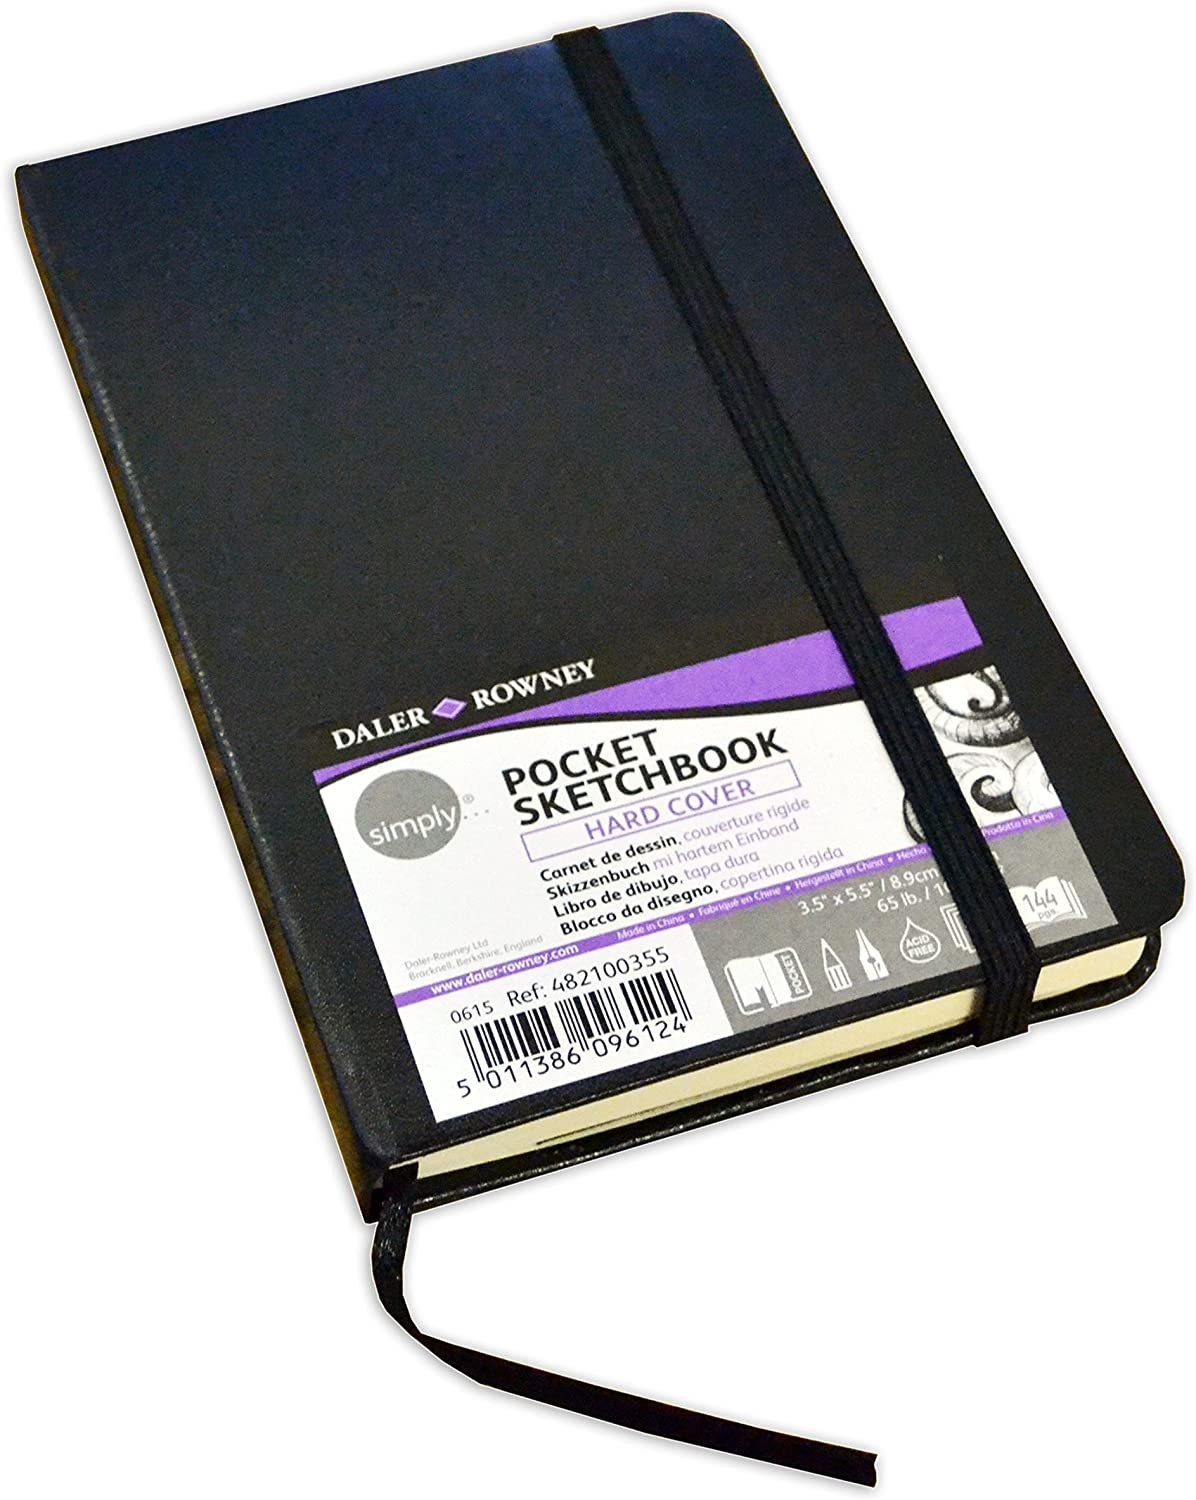 Daler Rowney - Layout Paper Pad - 45gsm - 80 Pages - A3/A4 - Made